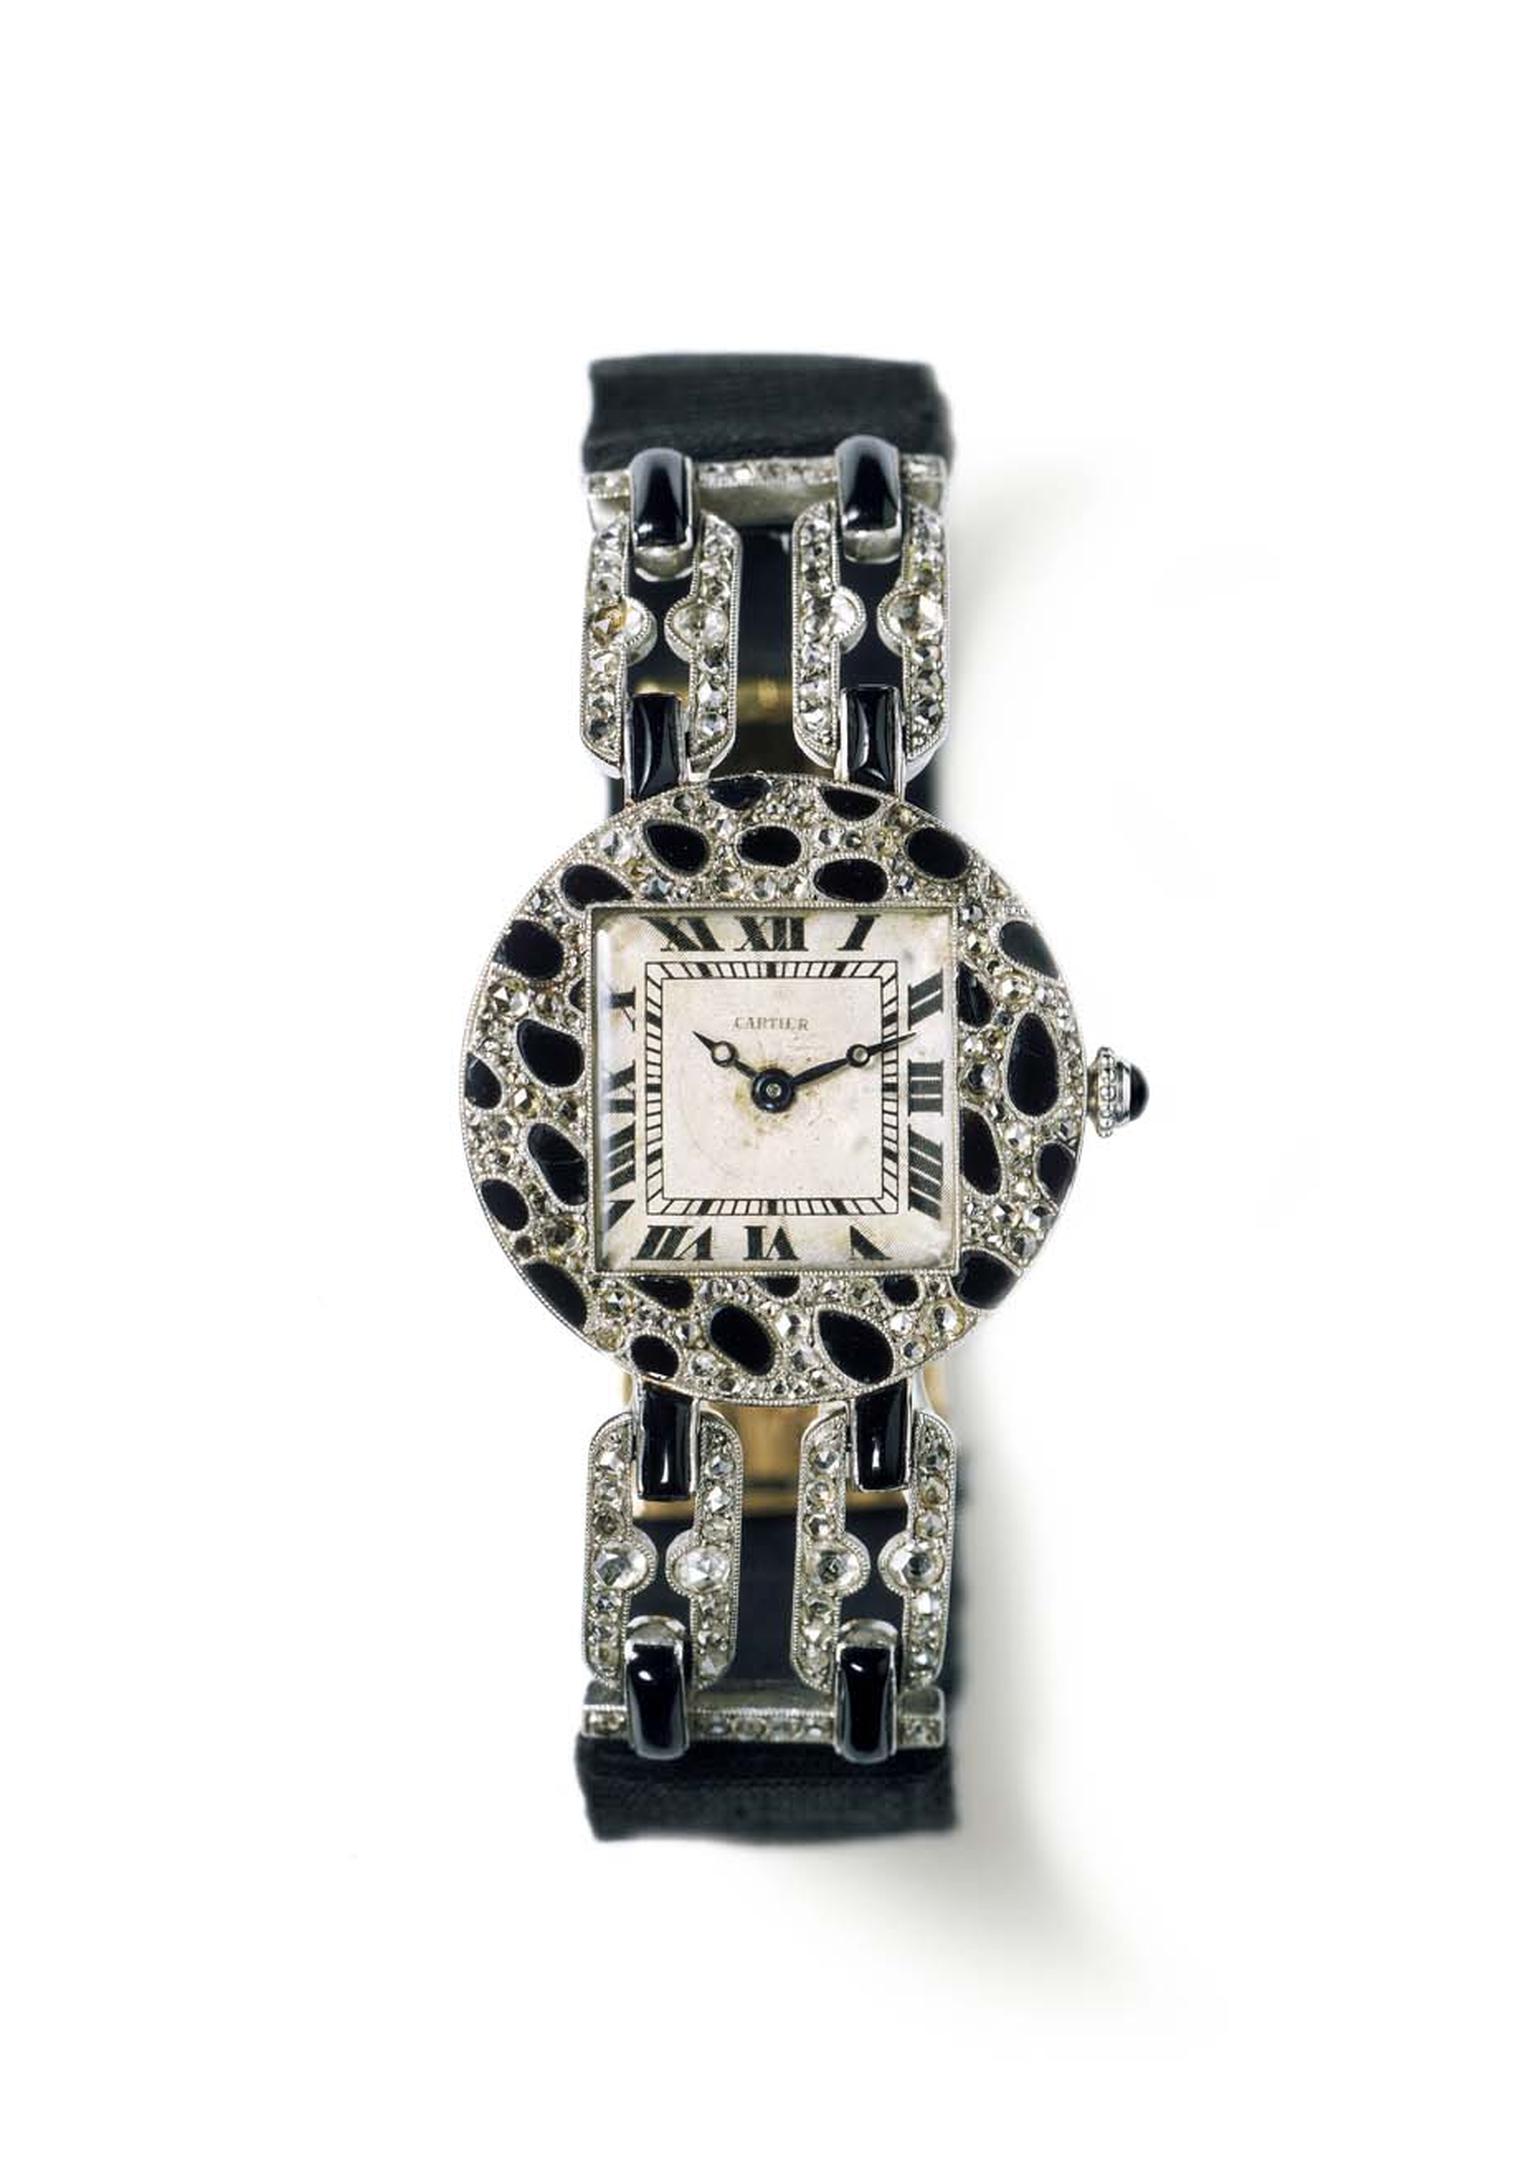 Cartier 1914 wristwatch with panther-spots motif features a round case in polished platinum, paved with rose-cut diamonds and onyx.